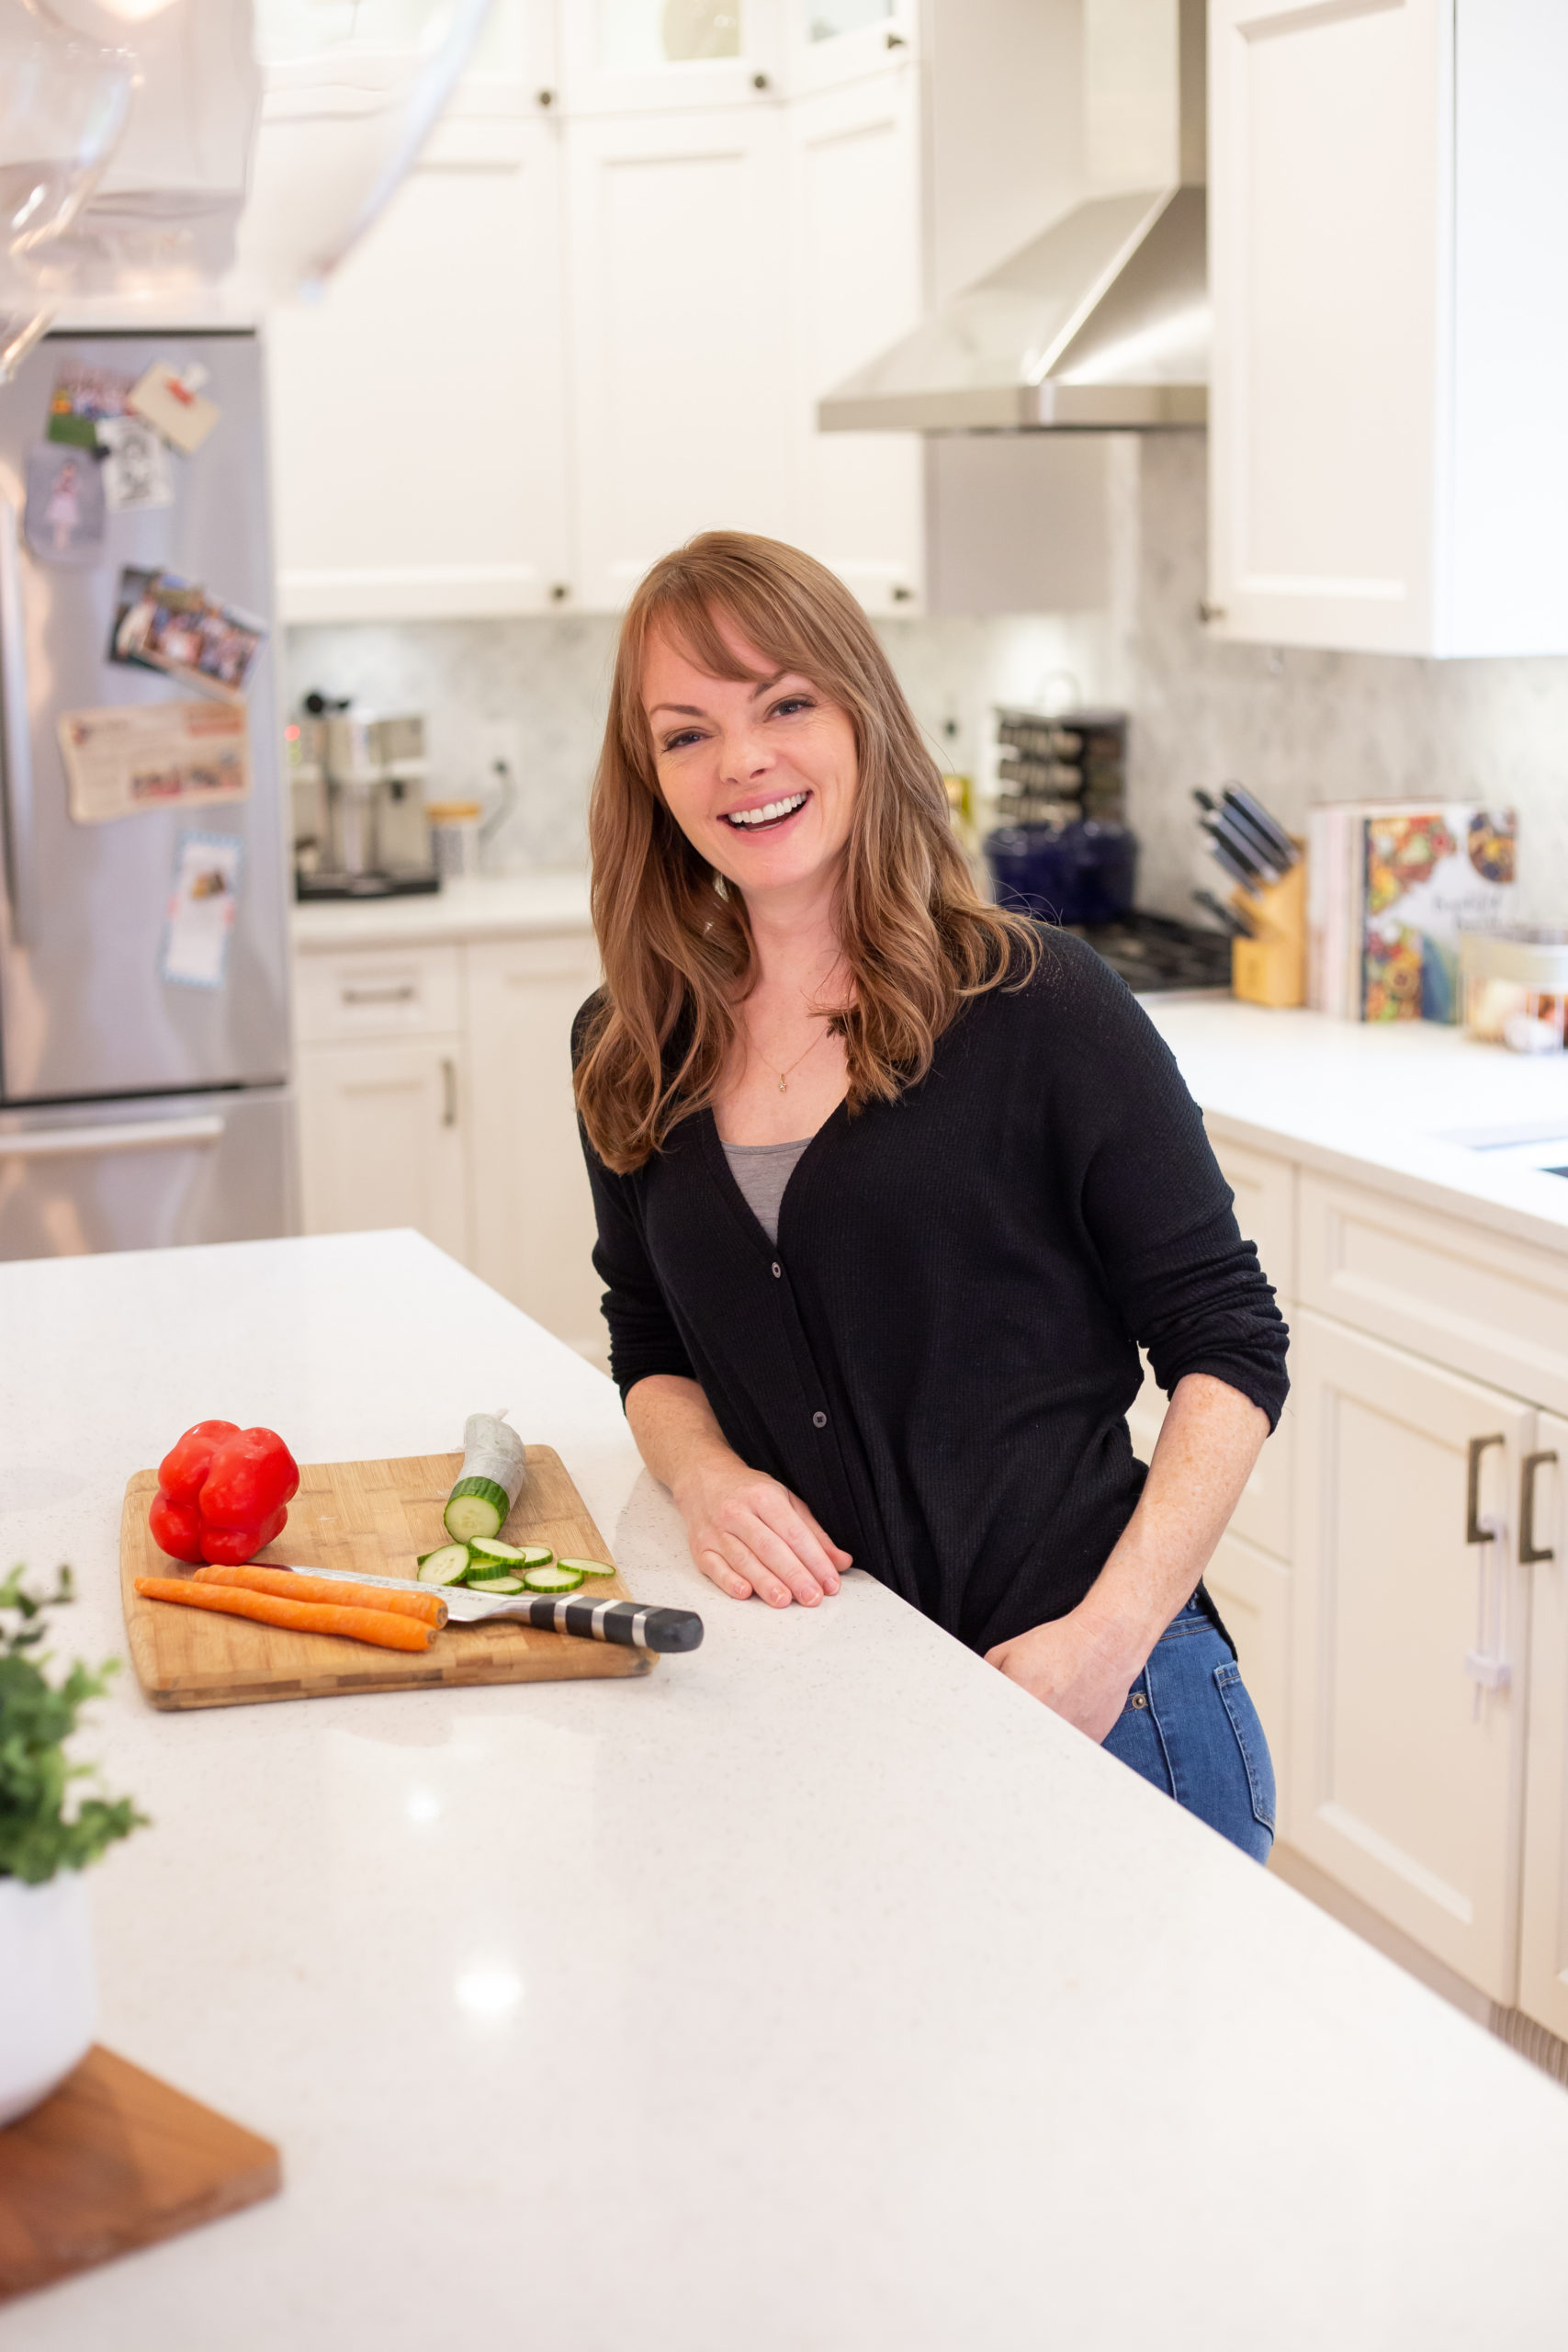 Christine Coughlin leaning against her kitchen island smiling at the camera, fresh veggies sit on the counter.